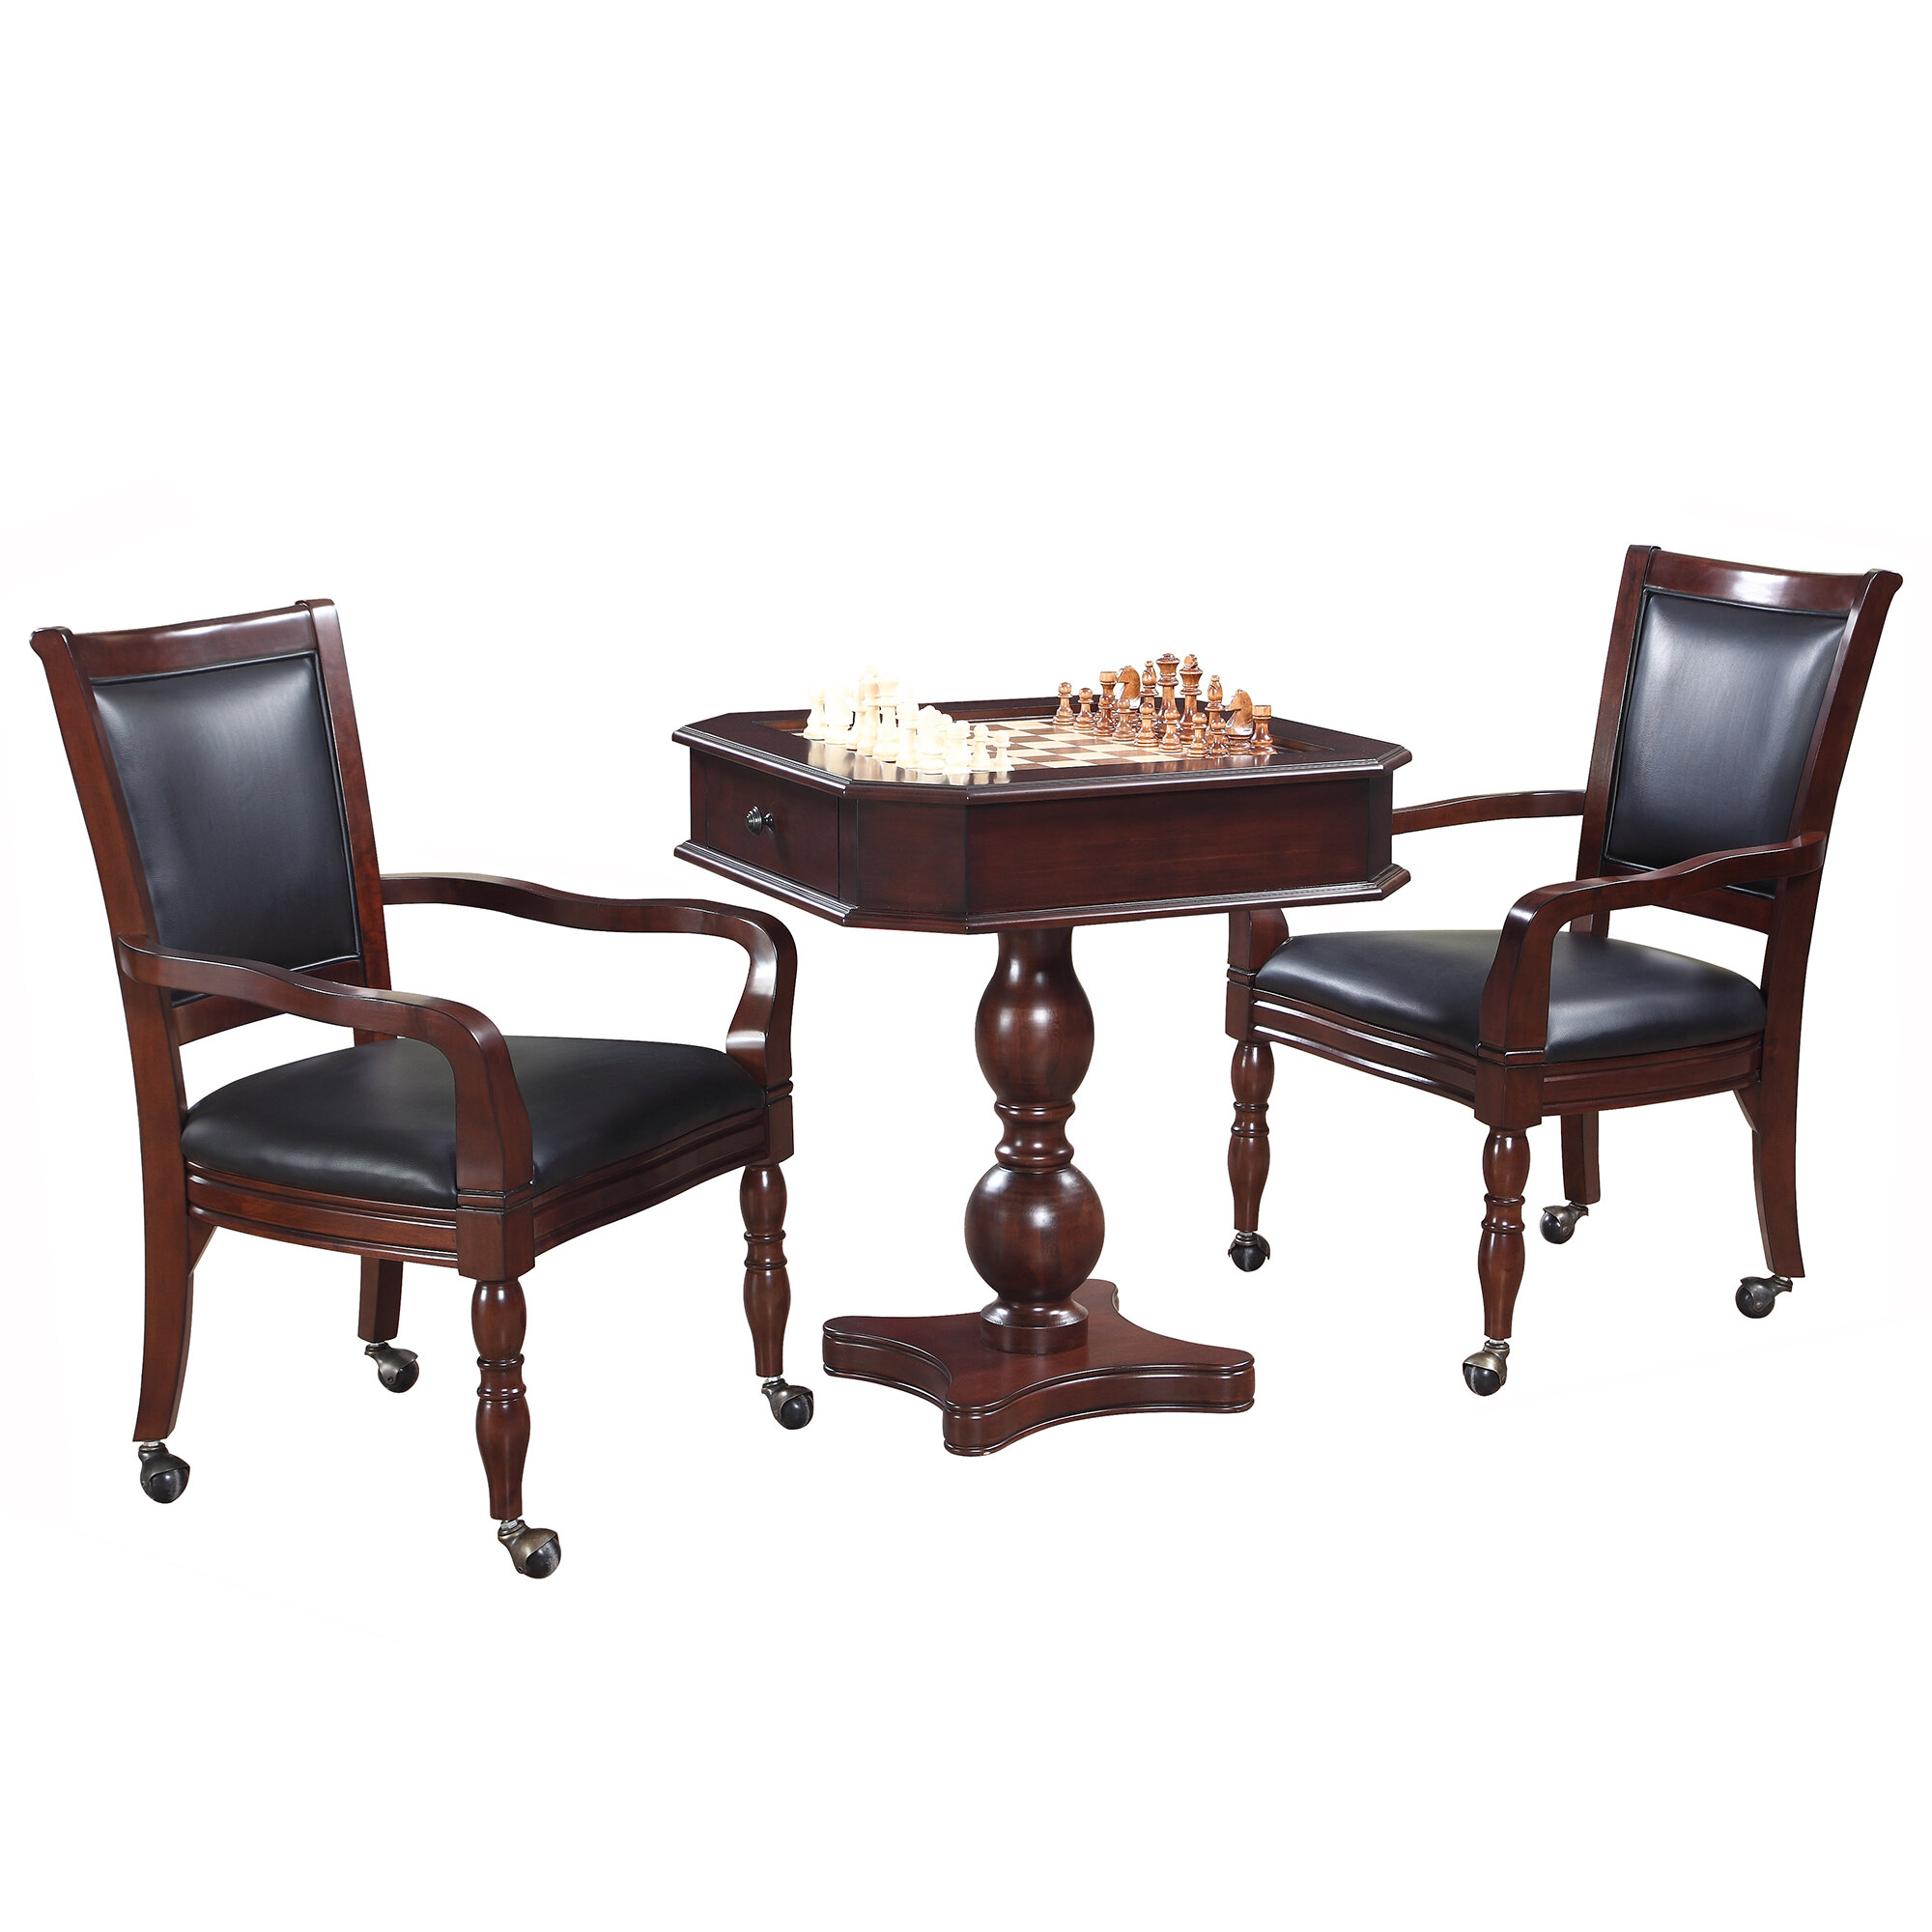 Chess and backgammon table